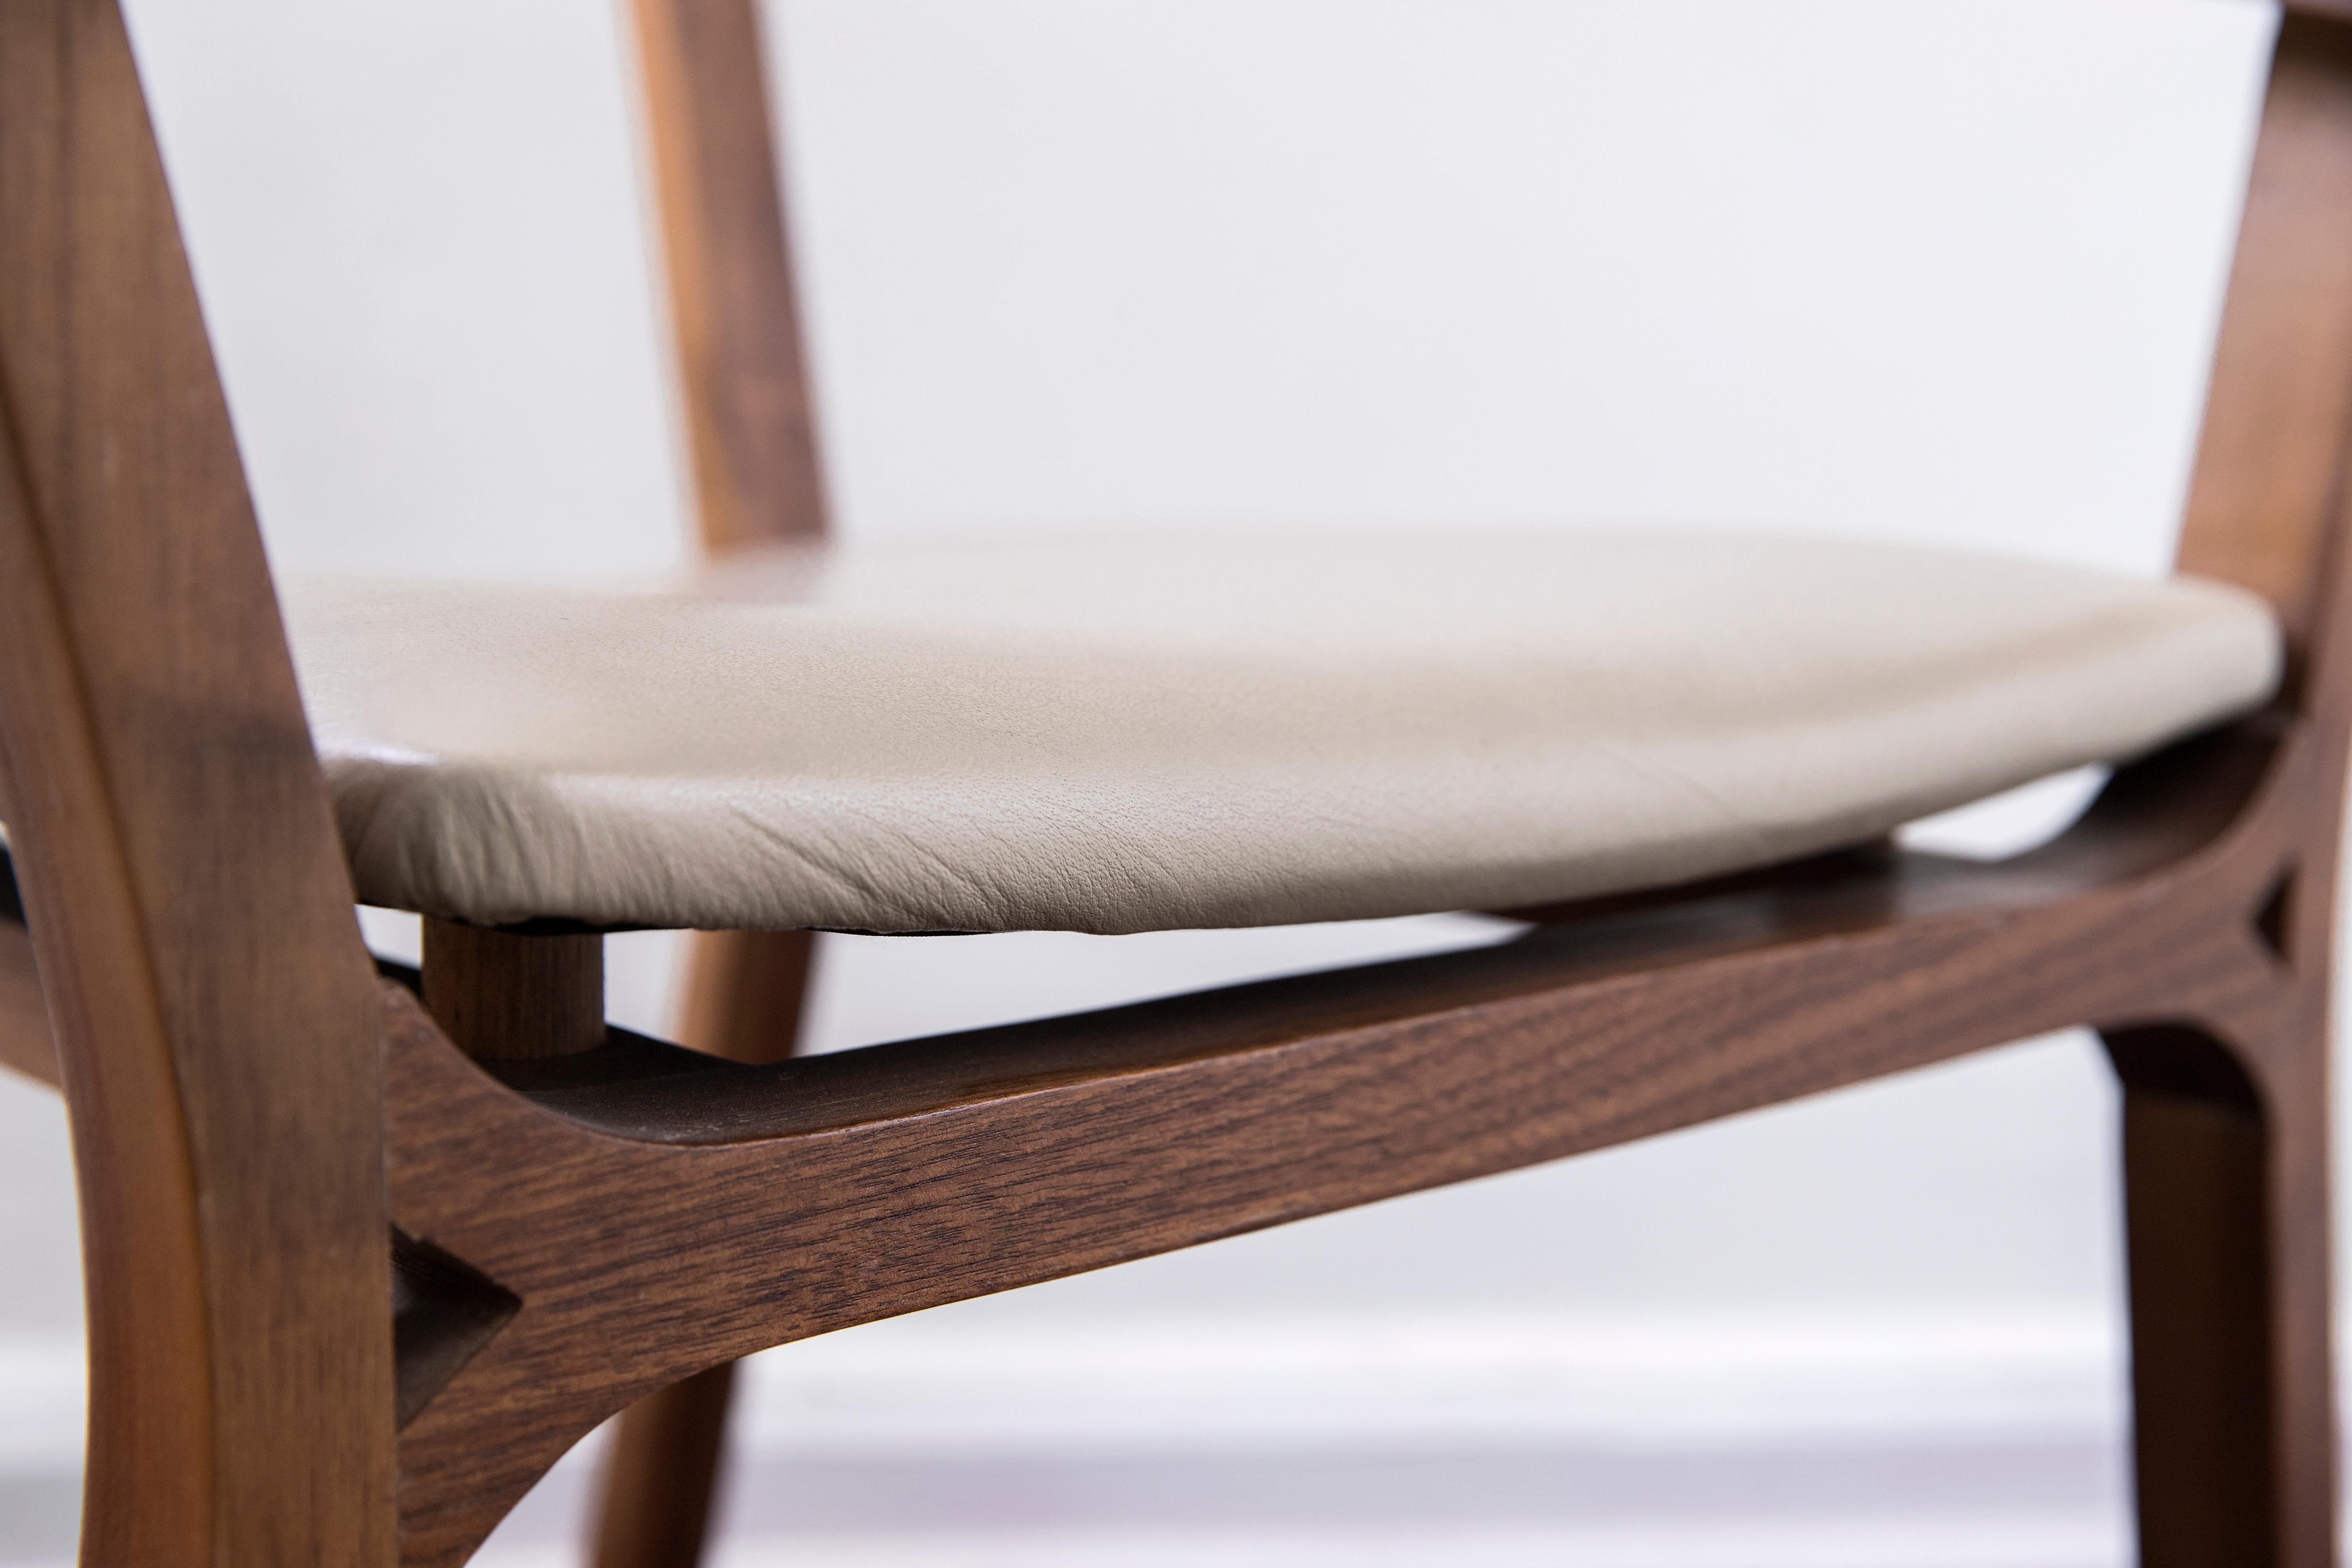 Machine-Made Armchair in Walnut Hardwood by Obiect, Mexican Contemporary Design For Sale